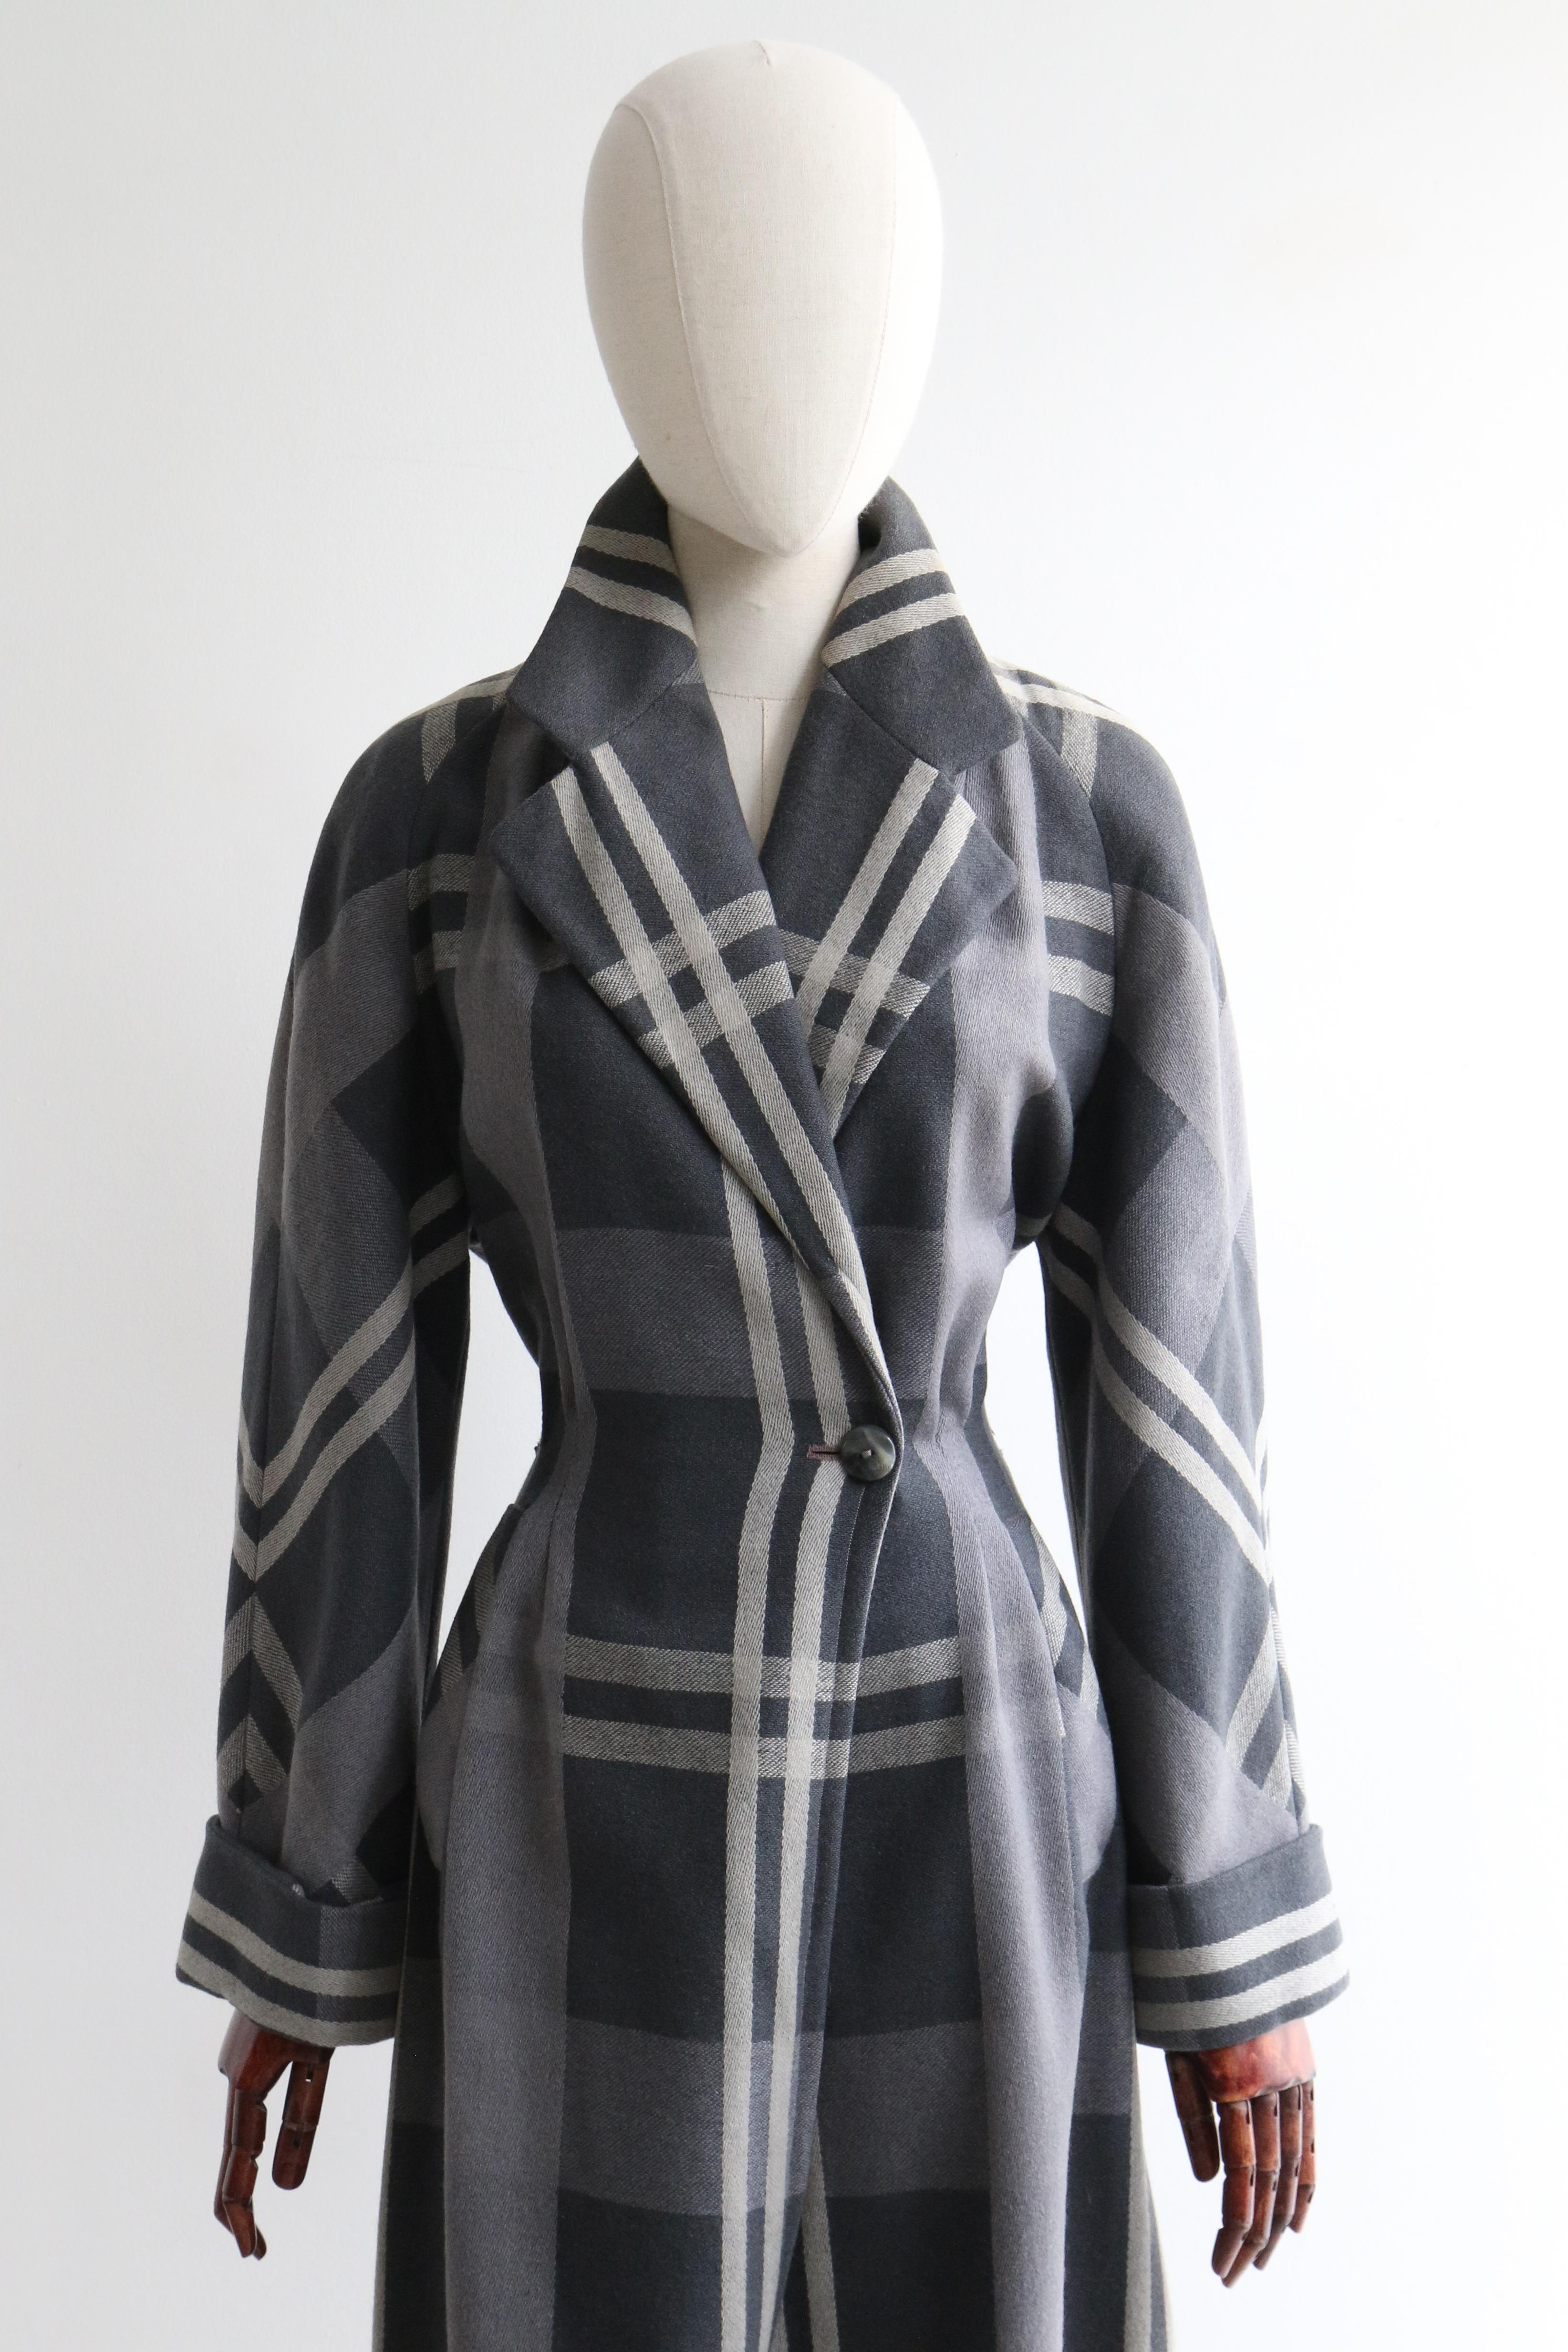 This truly magnificent 1940's wool coat in a wide plaid woven pattern, in shades of grey, fully lined in silk, is the perfect addition to your seasonal wardrobe.

The V shaped neckline is framed by a notched collar that joins the front of the coat